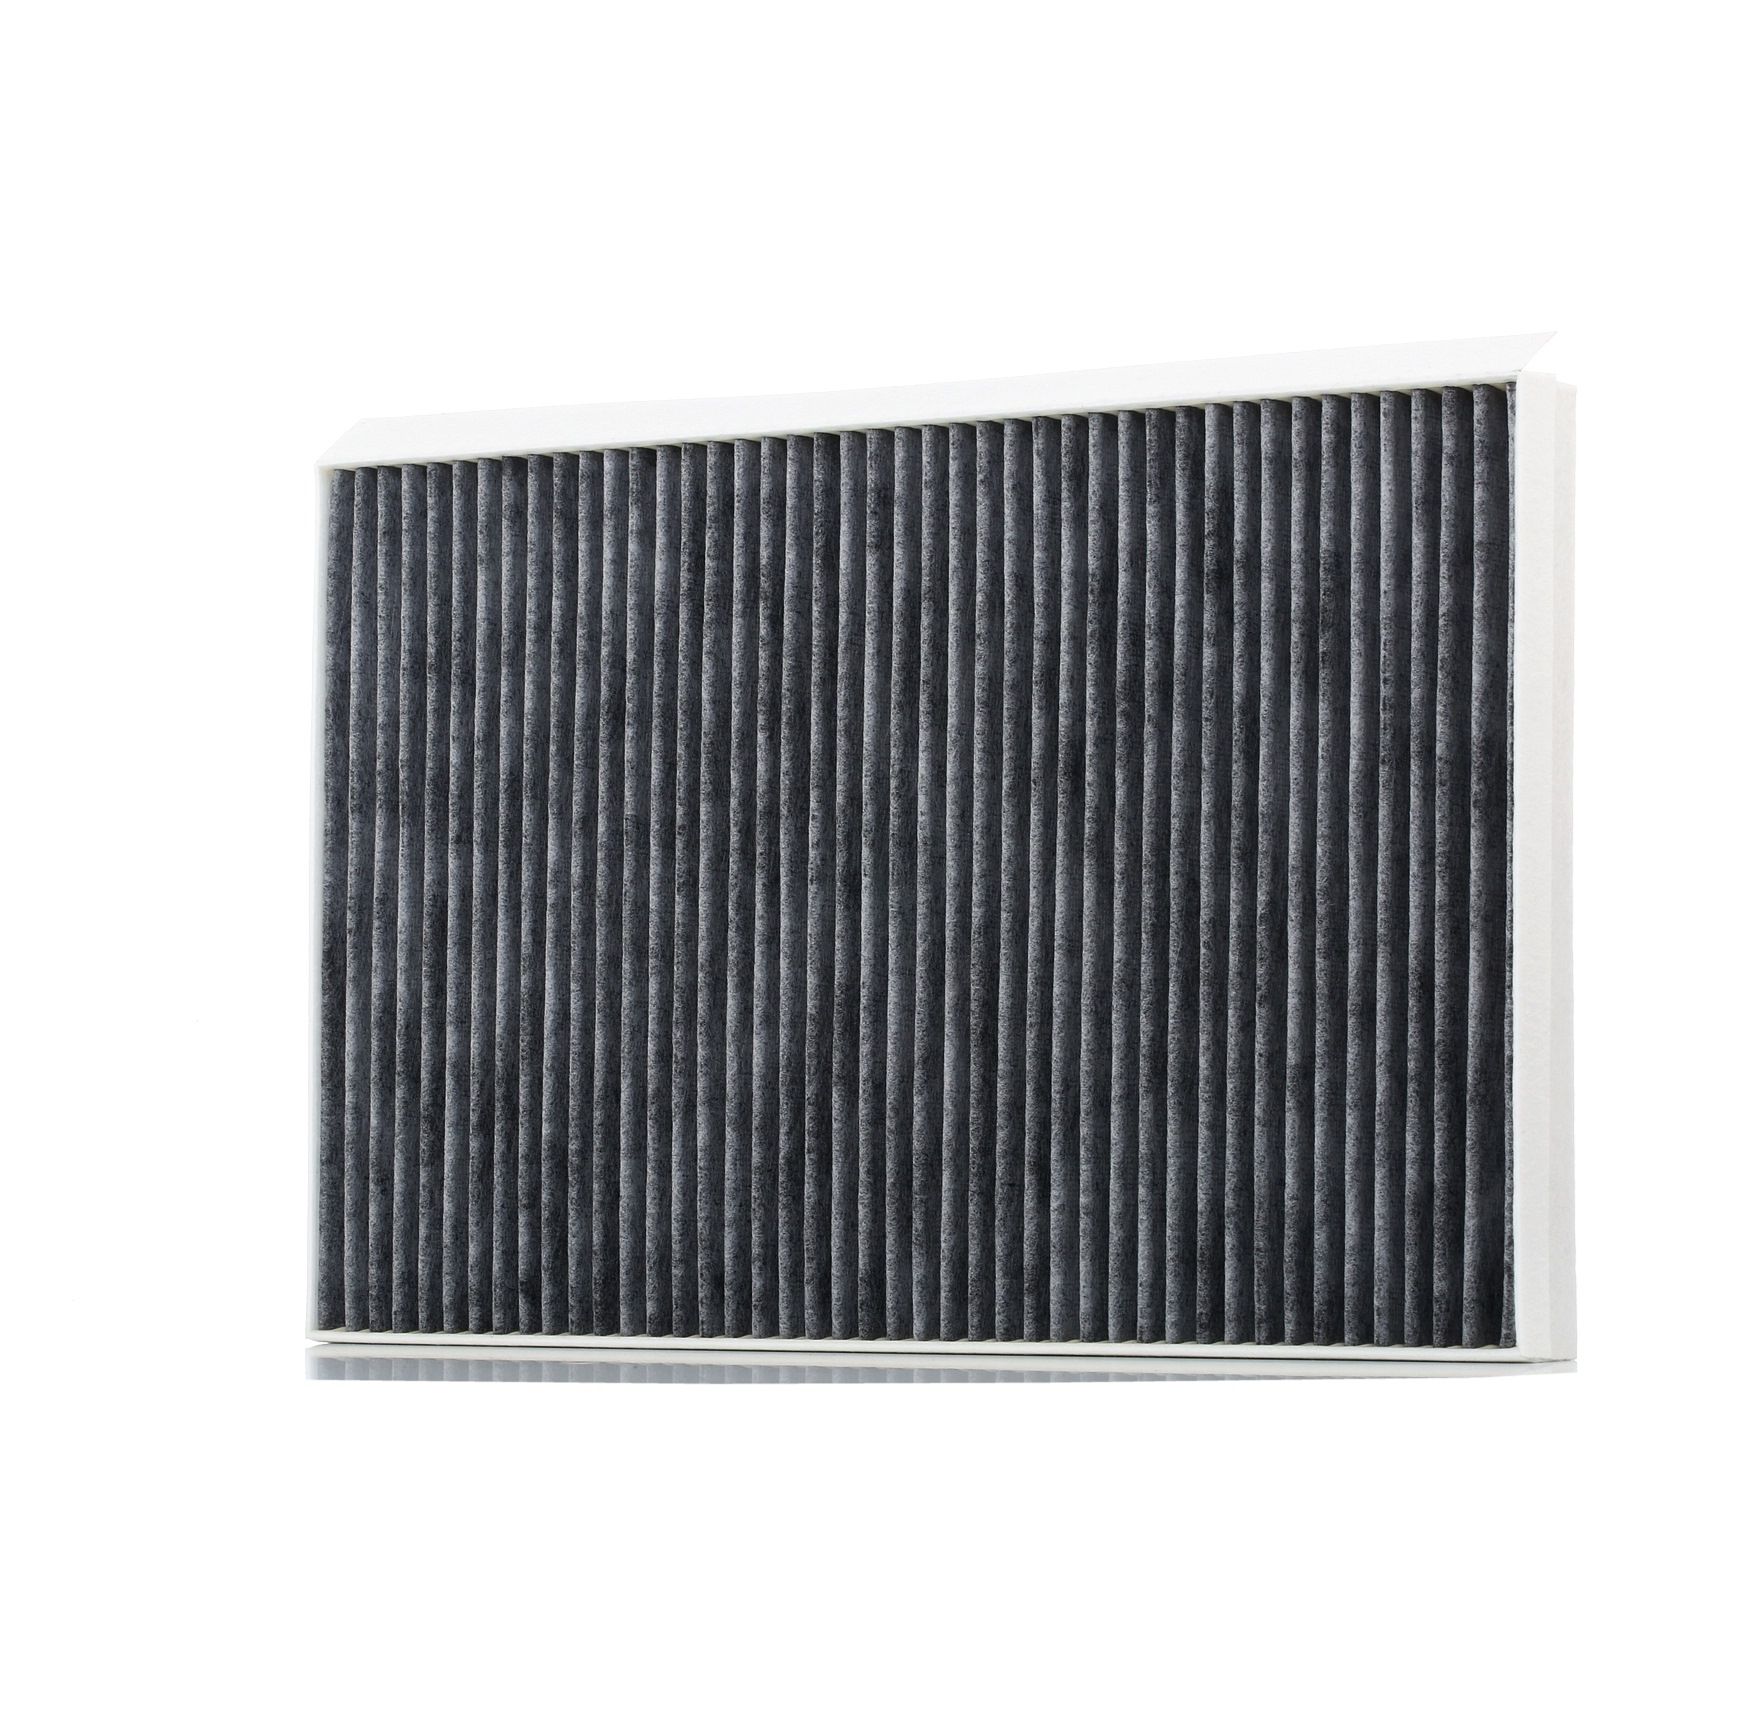 R 2513 BOSCH Activated Carbon Filter, 356 mm x 238 mm x 35 mm Width: 238mm, Height: 35mm, Length: 356mm Cabin filter 1 987 432 513 buy